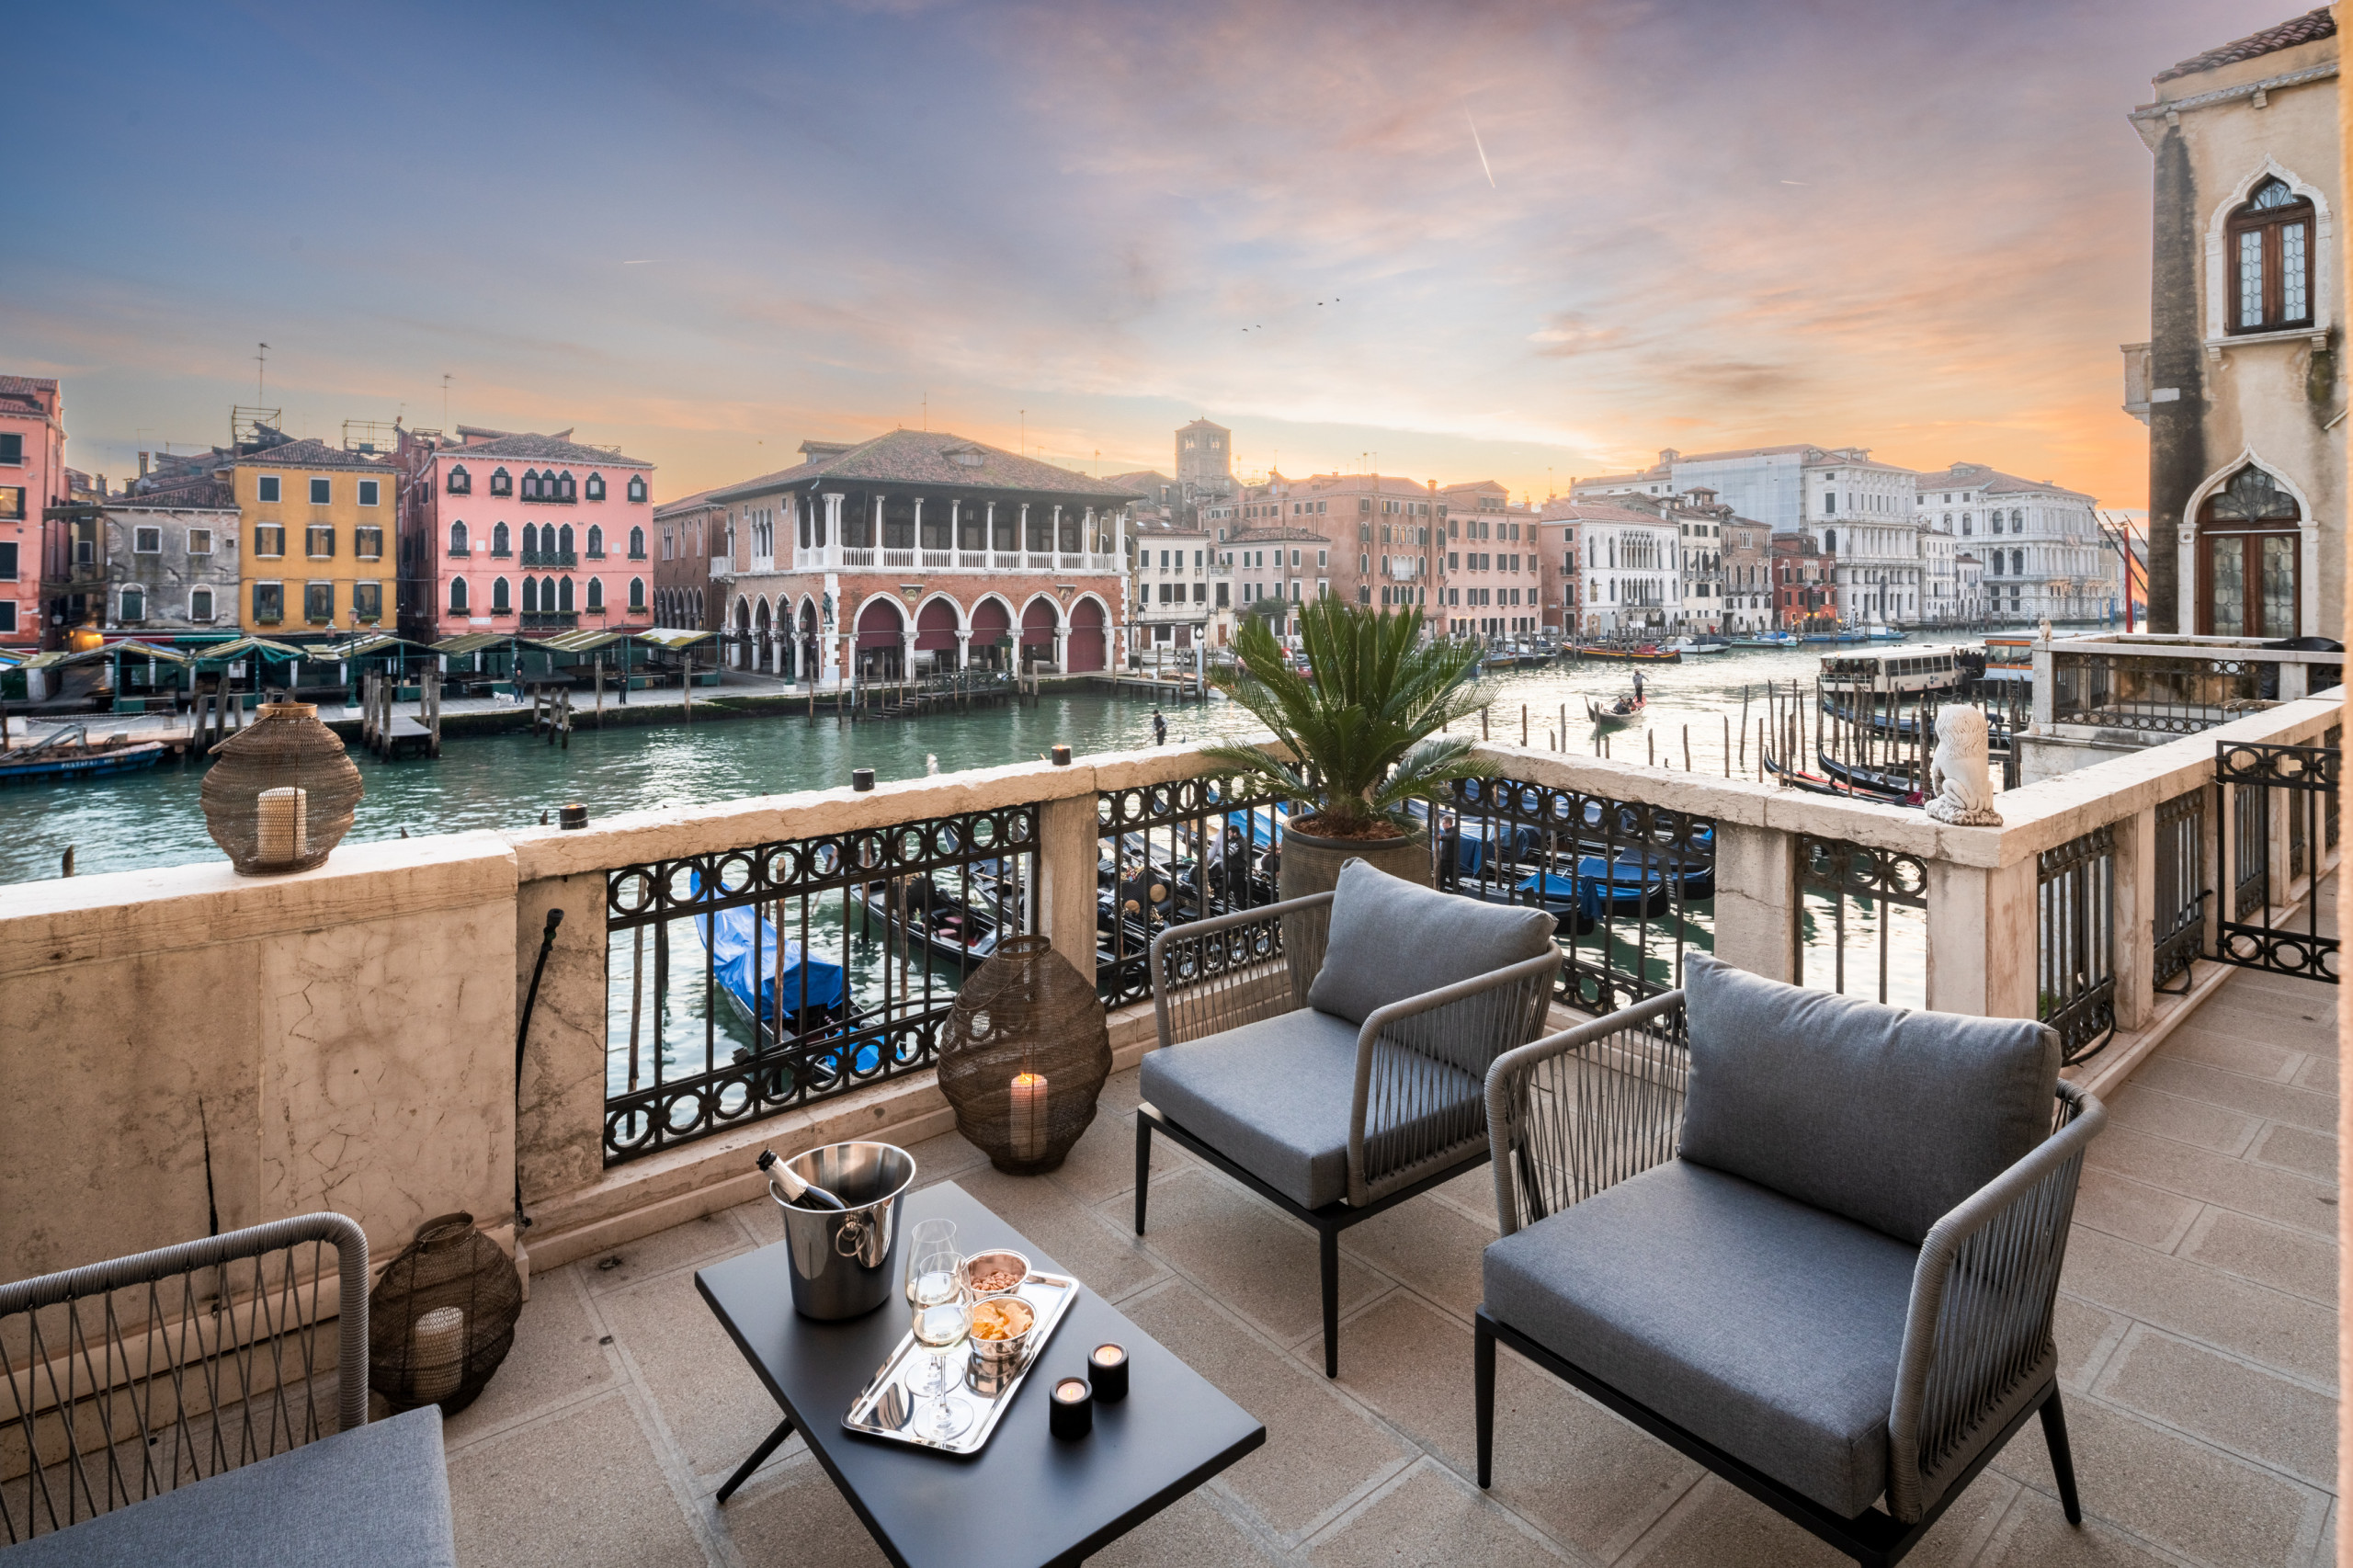  a Venezia - Grand canal luxury apartment with terrace R&R